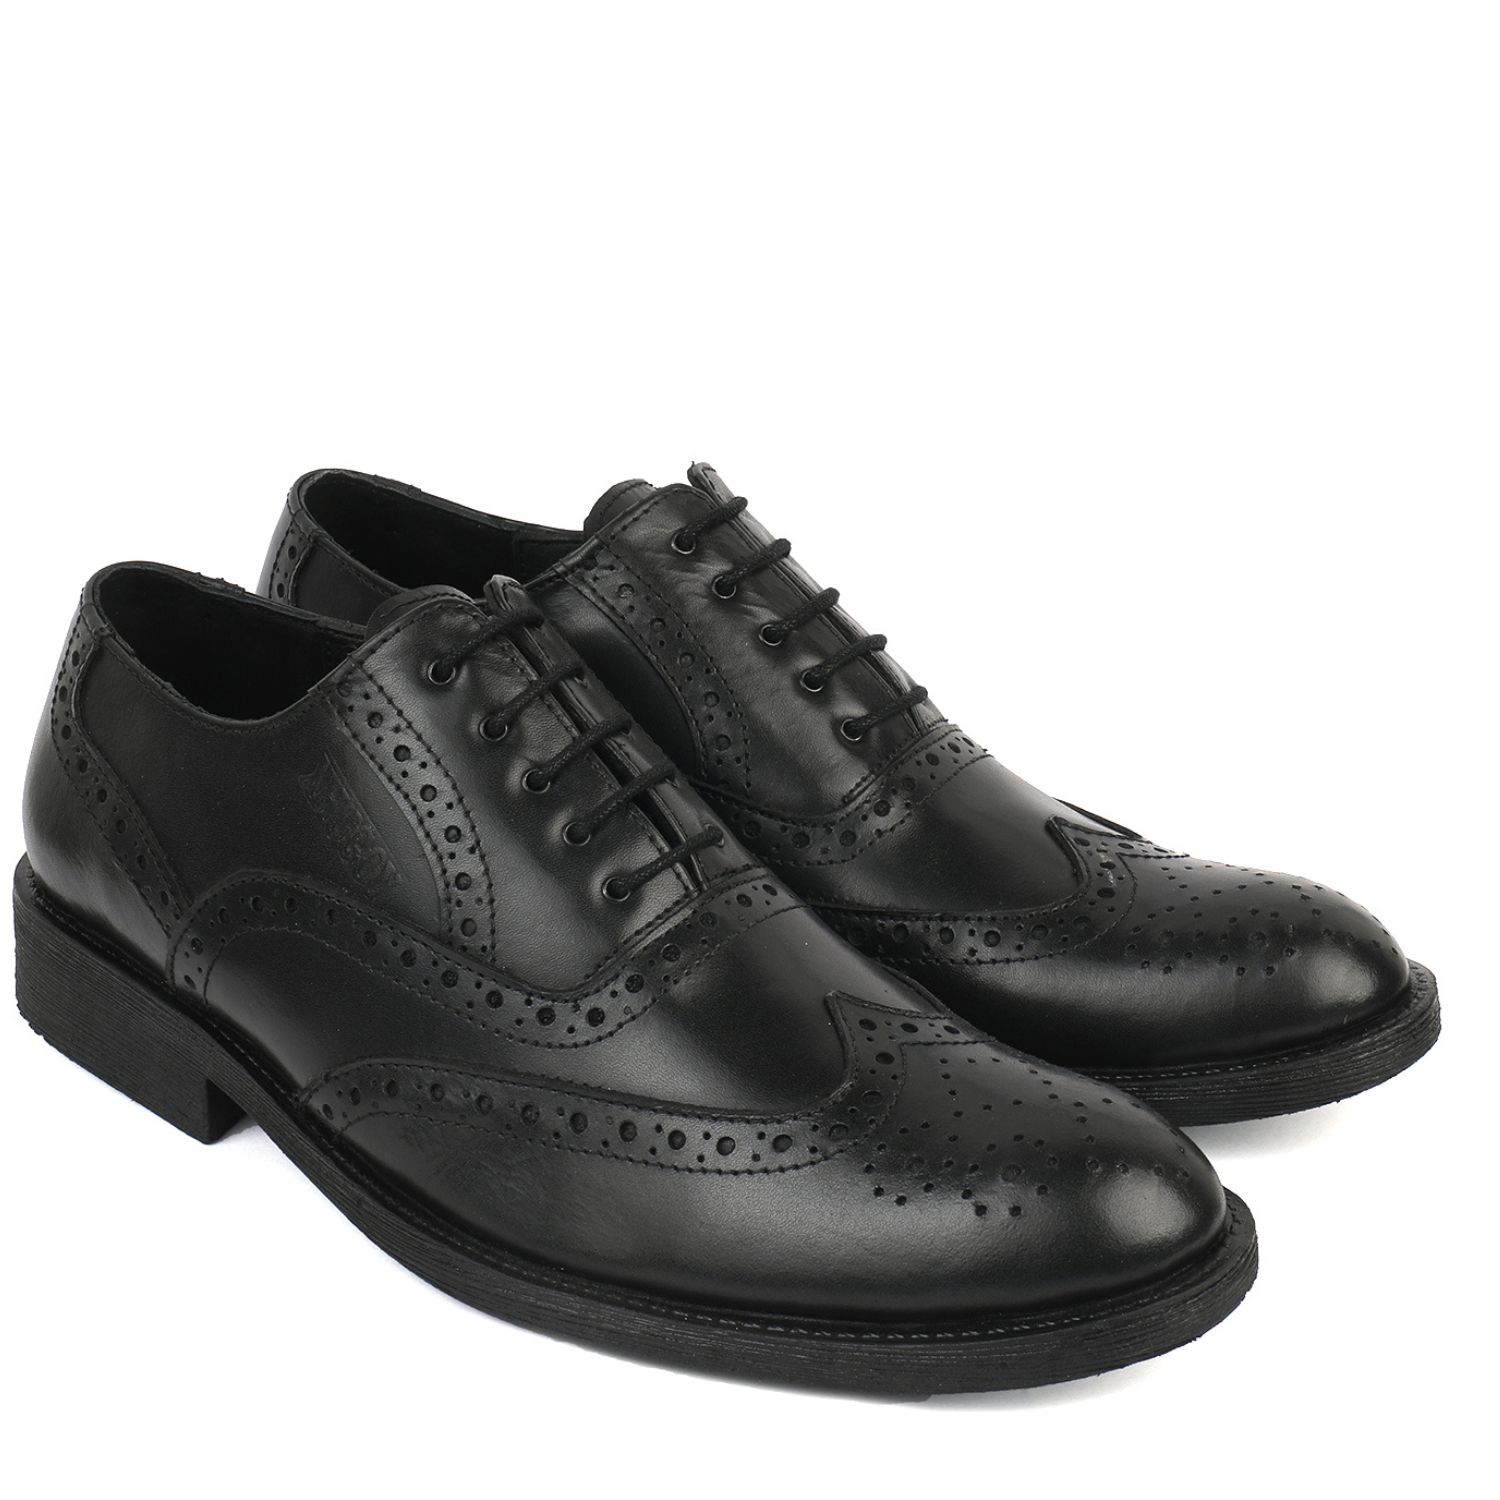 XHUGOY Black Leather Brogue Formal Shoes for Men - Quality Police Shoes ...